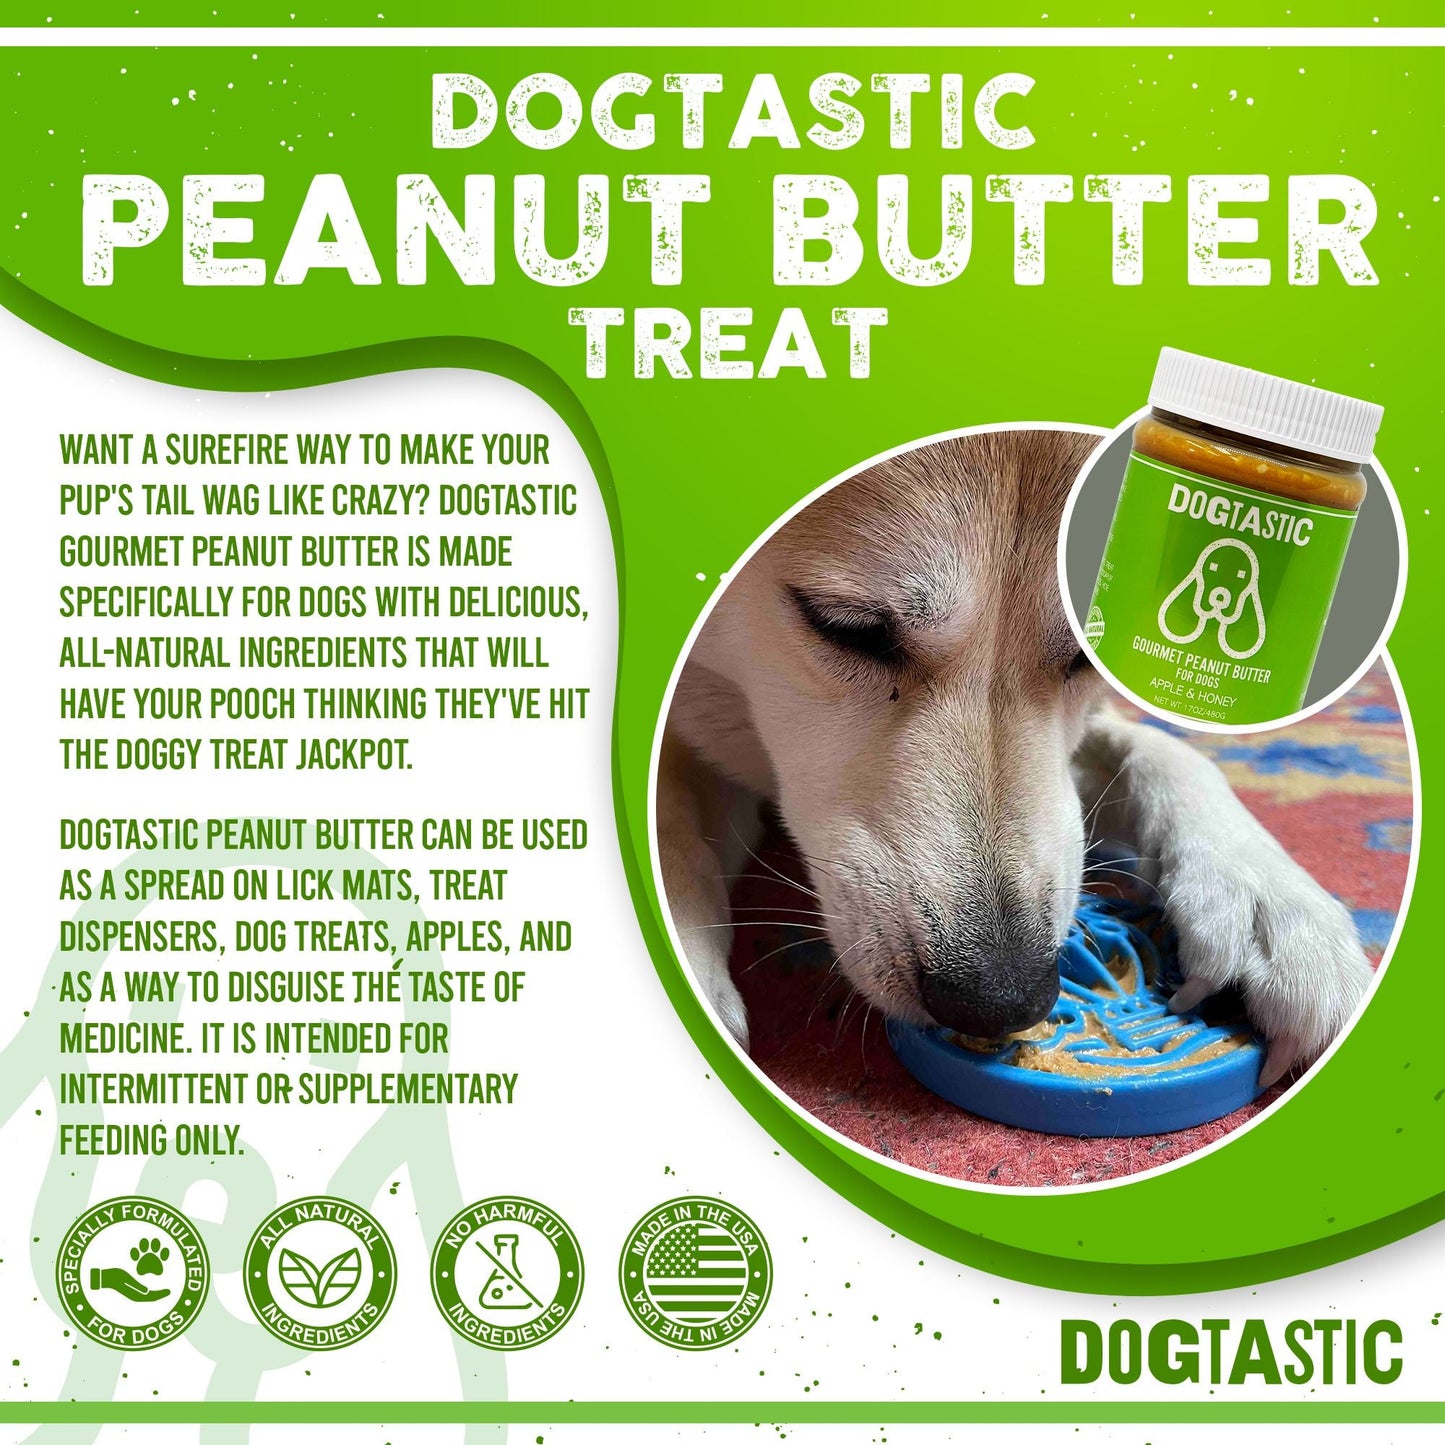 DOGTASTIC Gourmet Peanut Butter for dogs - HONEY FLAVOR T&T